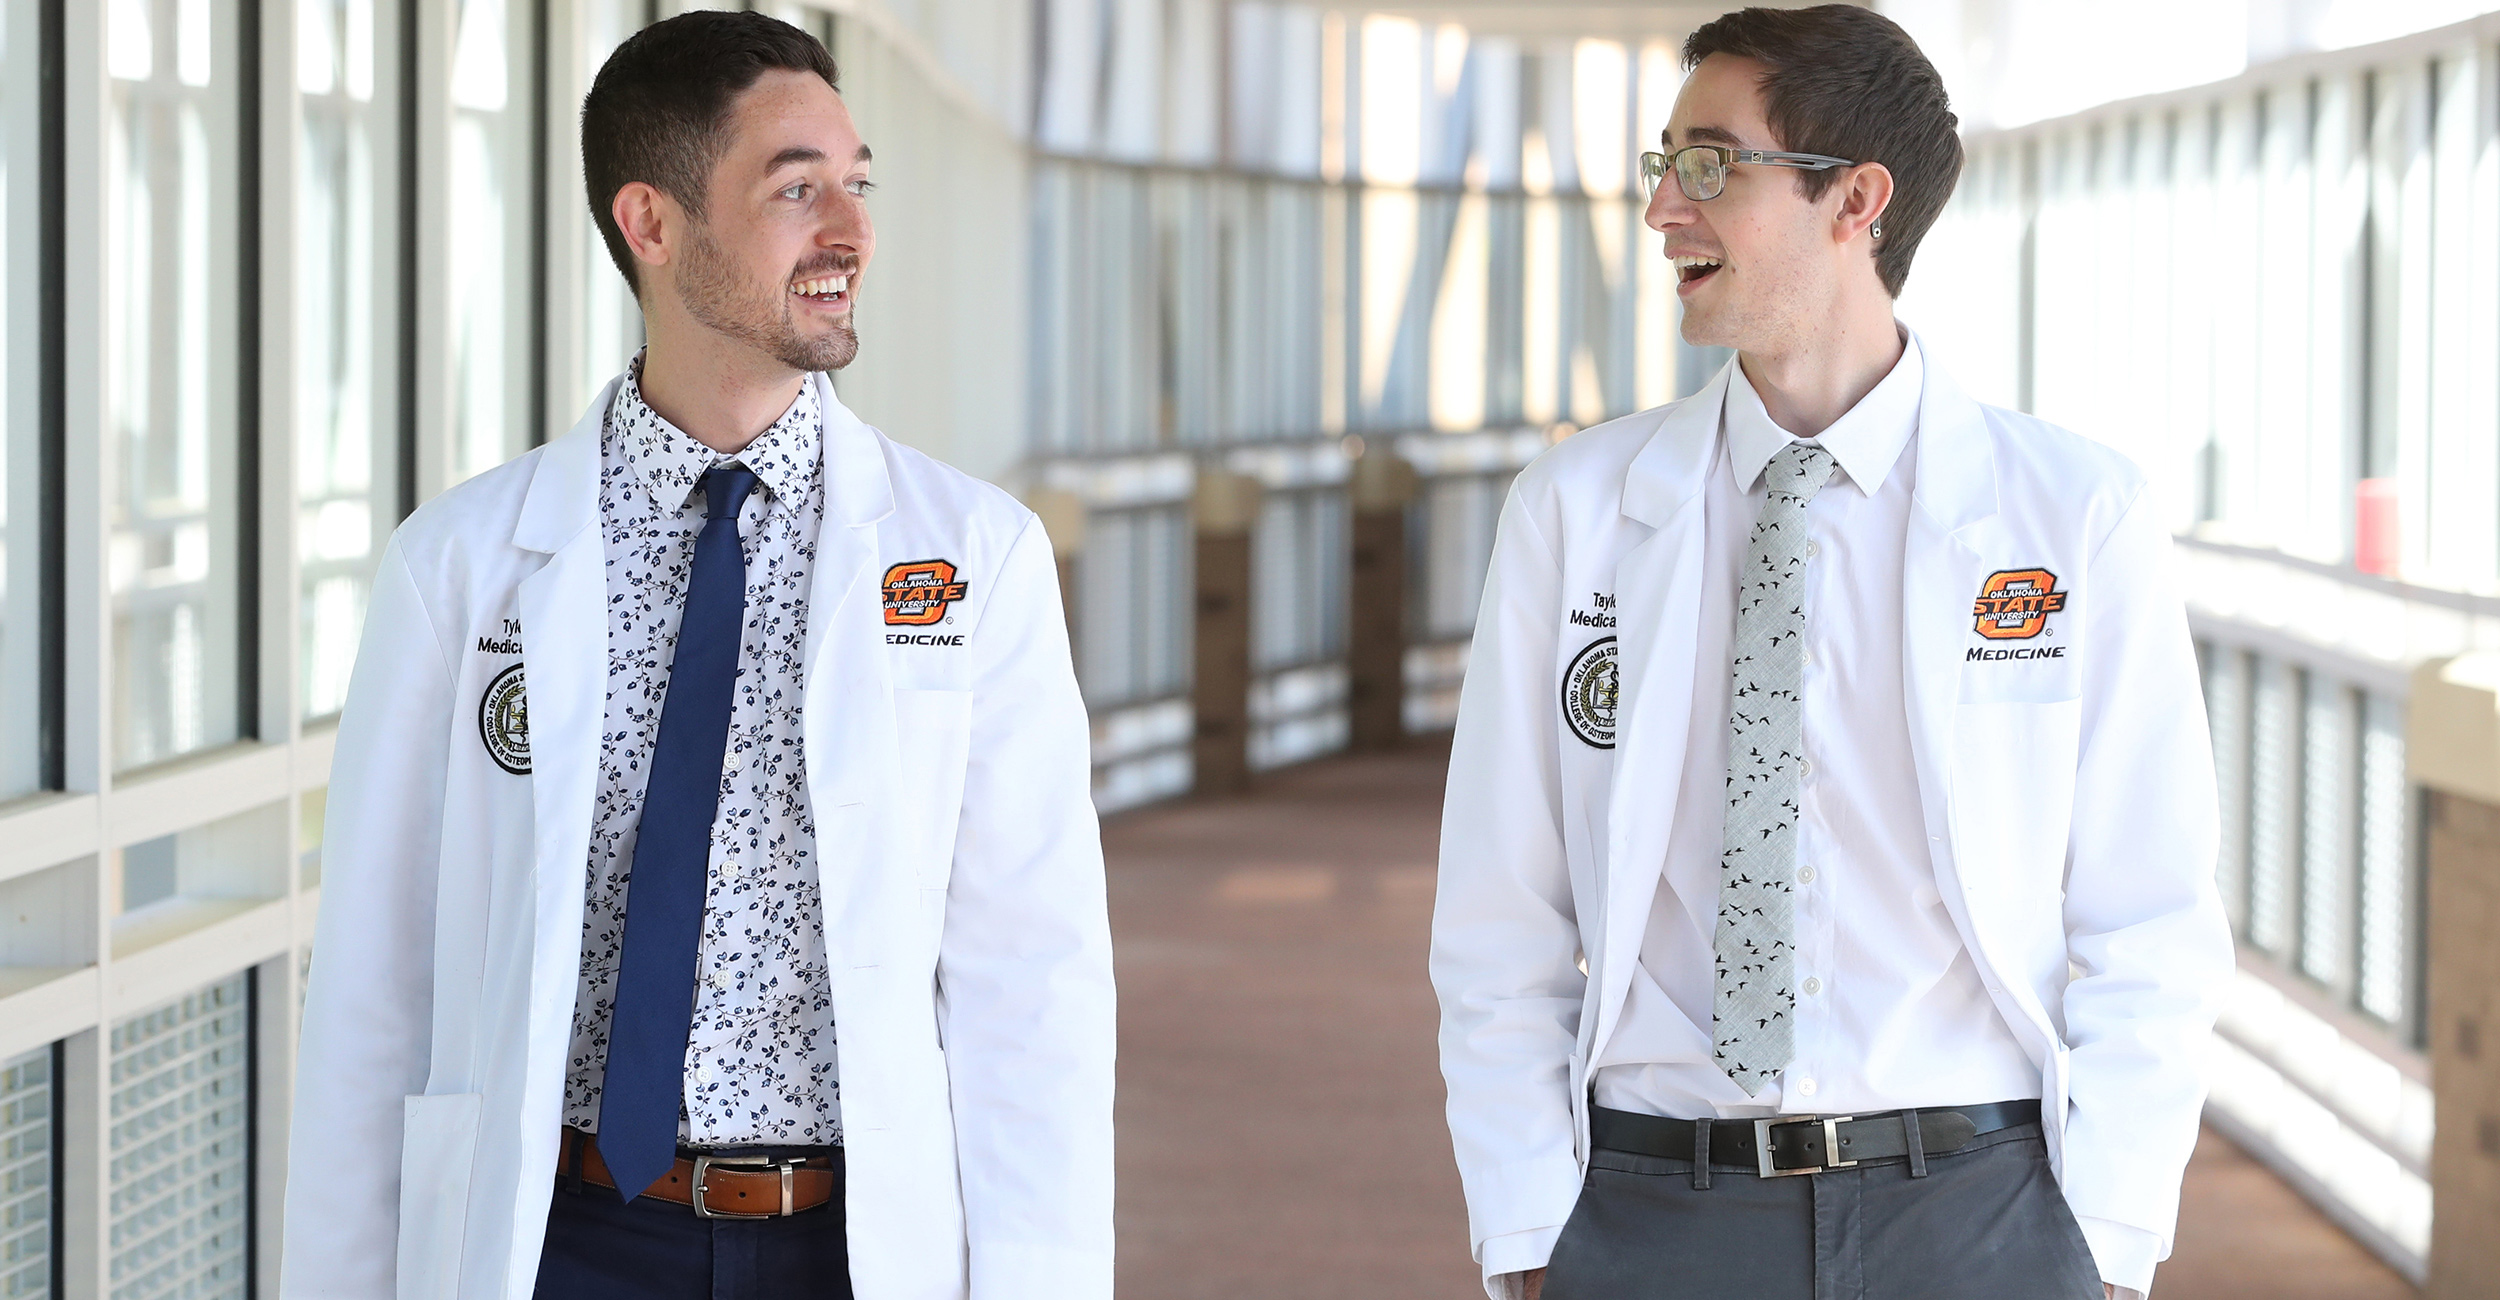 Brothers Tyler Snyder (left) and Taylor Snyder will soon graduate from the Oklahoma State University College of Osteopathic Medicine together.